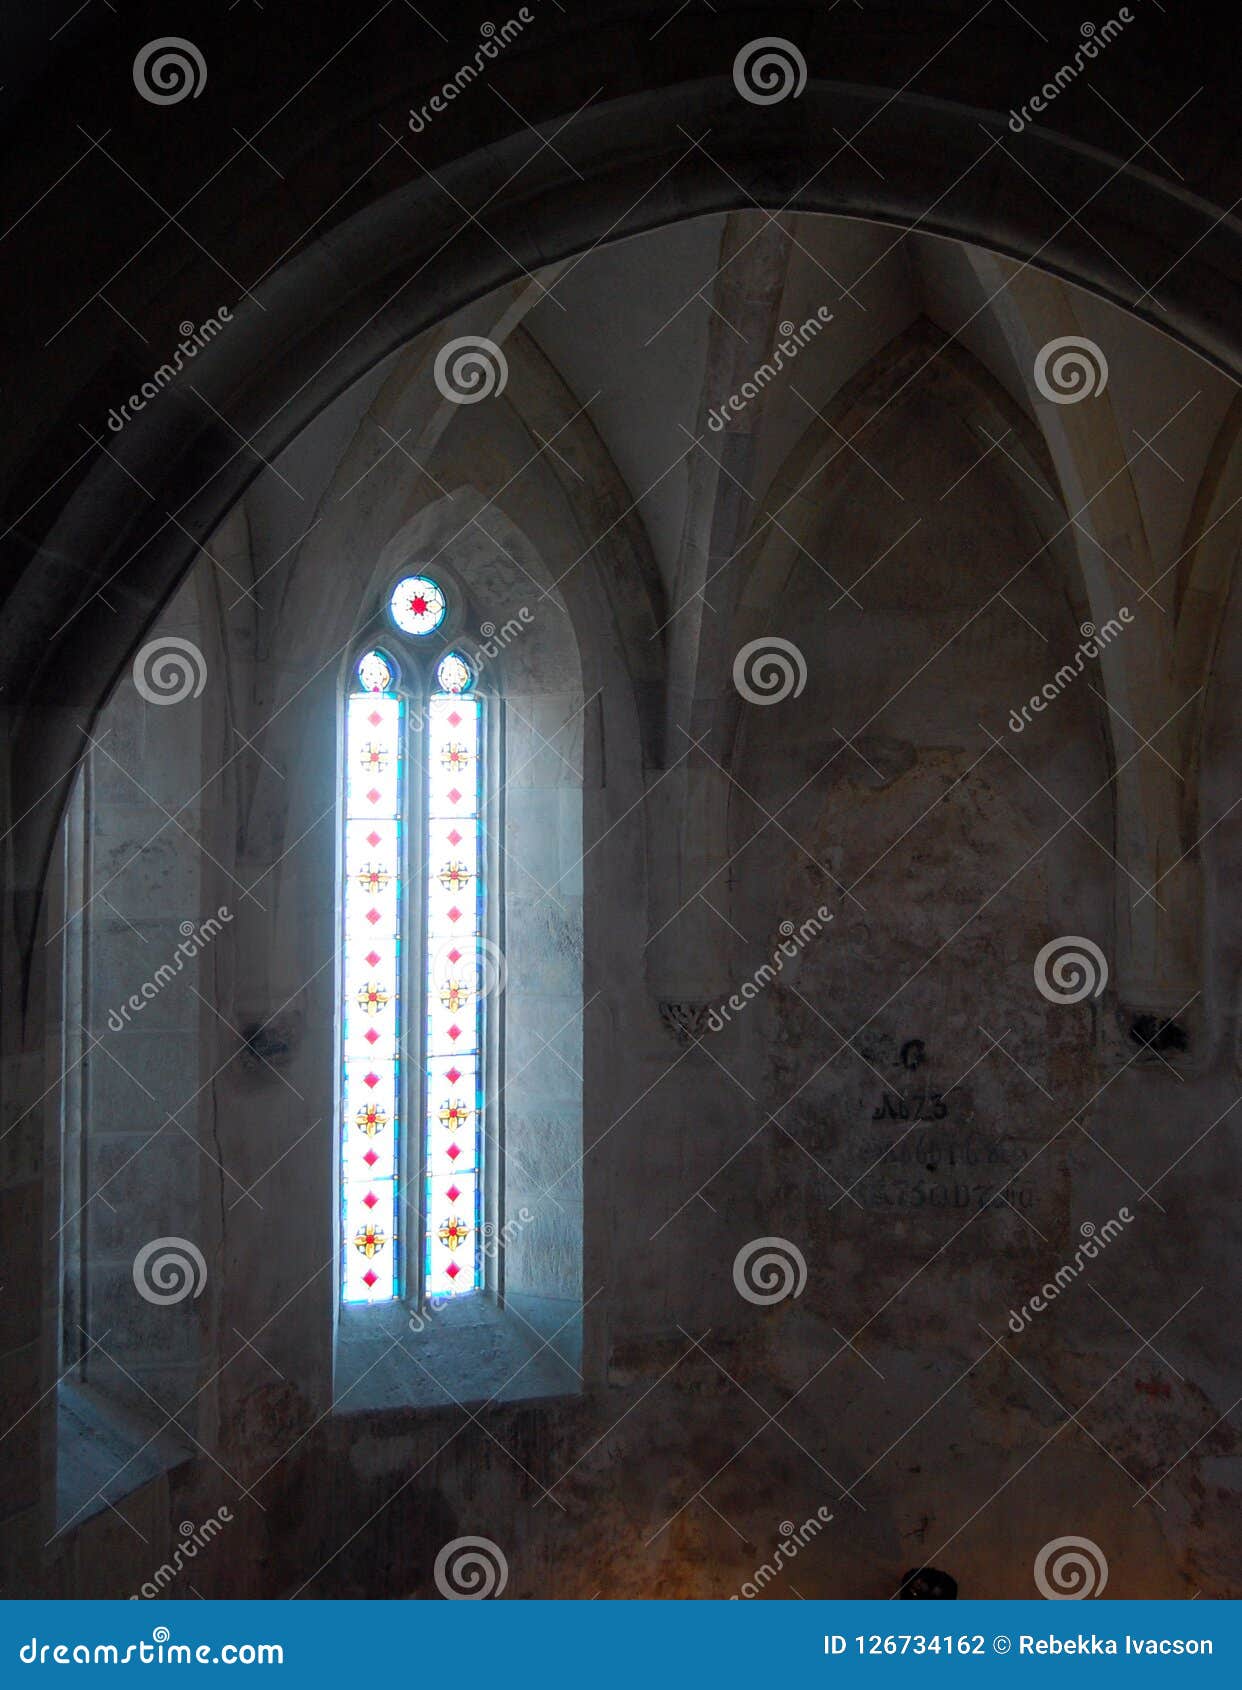 Vintage Stained Glass Window In Old Castle Interior Stock Photo Megapixl